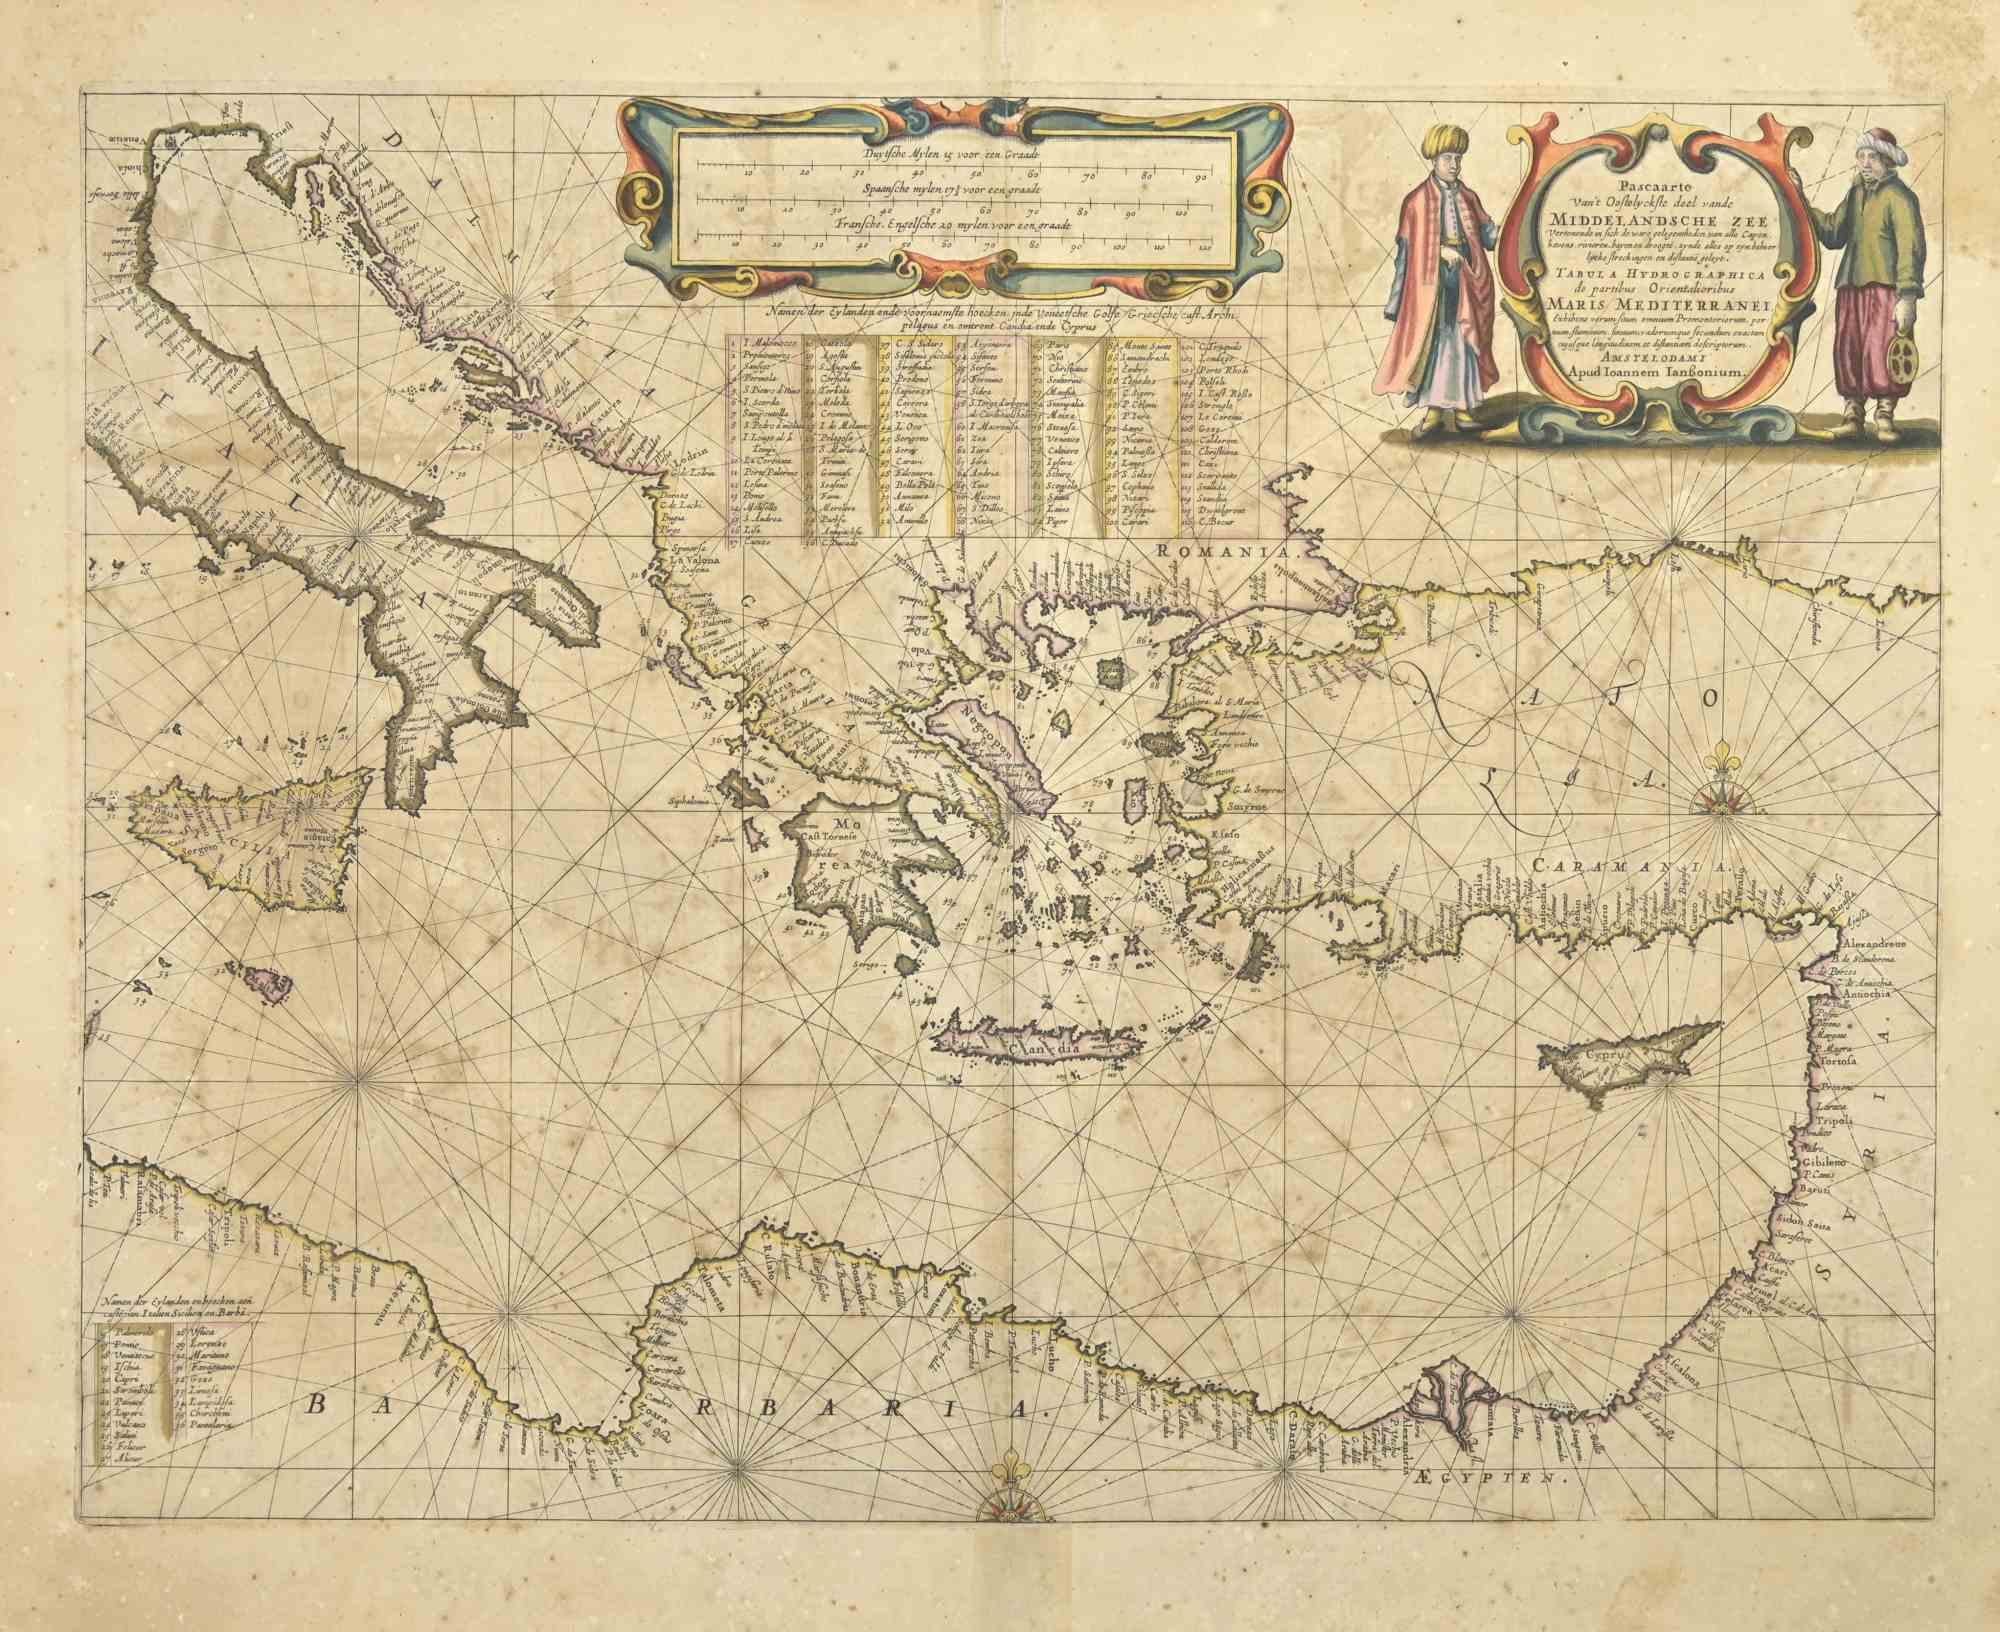 Maris Mediterranei is an ancient map realized in 1650 by Johannes Janssonius (1588-1664).

The Map is Hand-colored etching, with coeval watercoloring.

Good conditions with slight foxing.

From Atlantis majoris quinta pars, Orbem maritimum [Novus